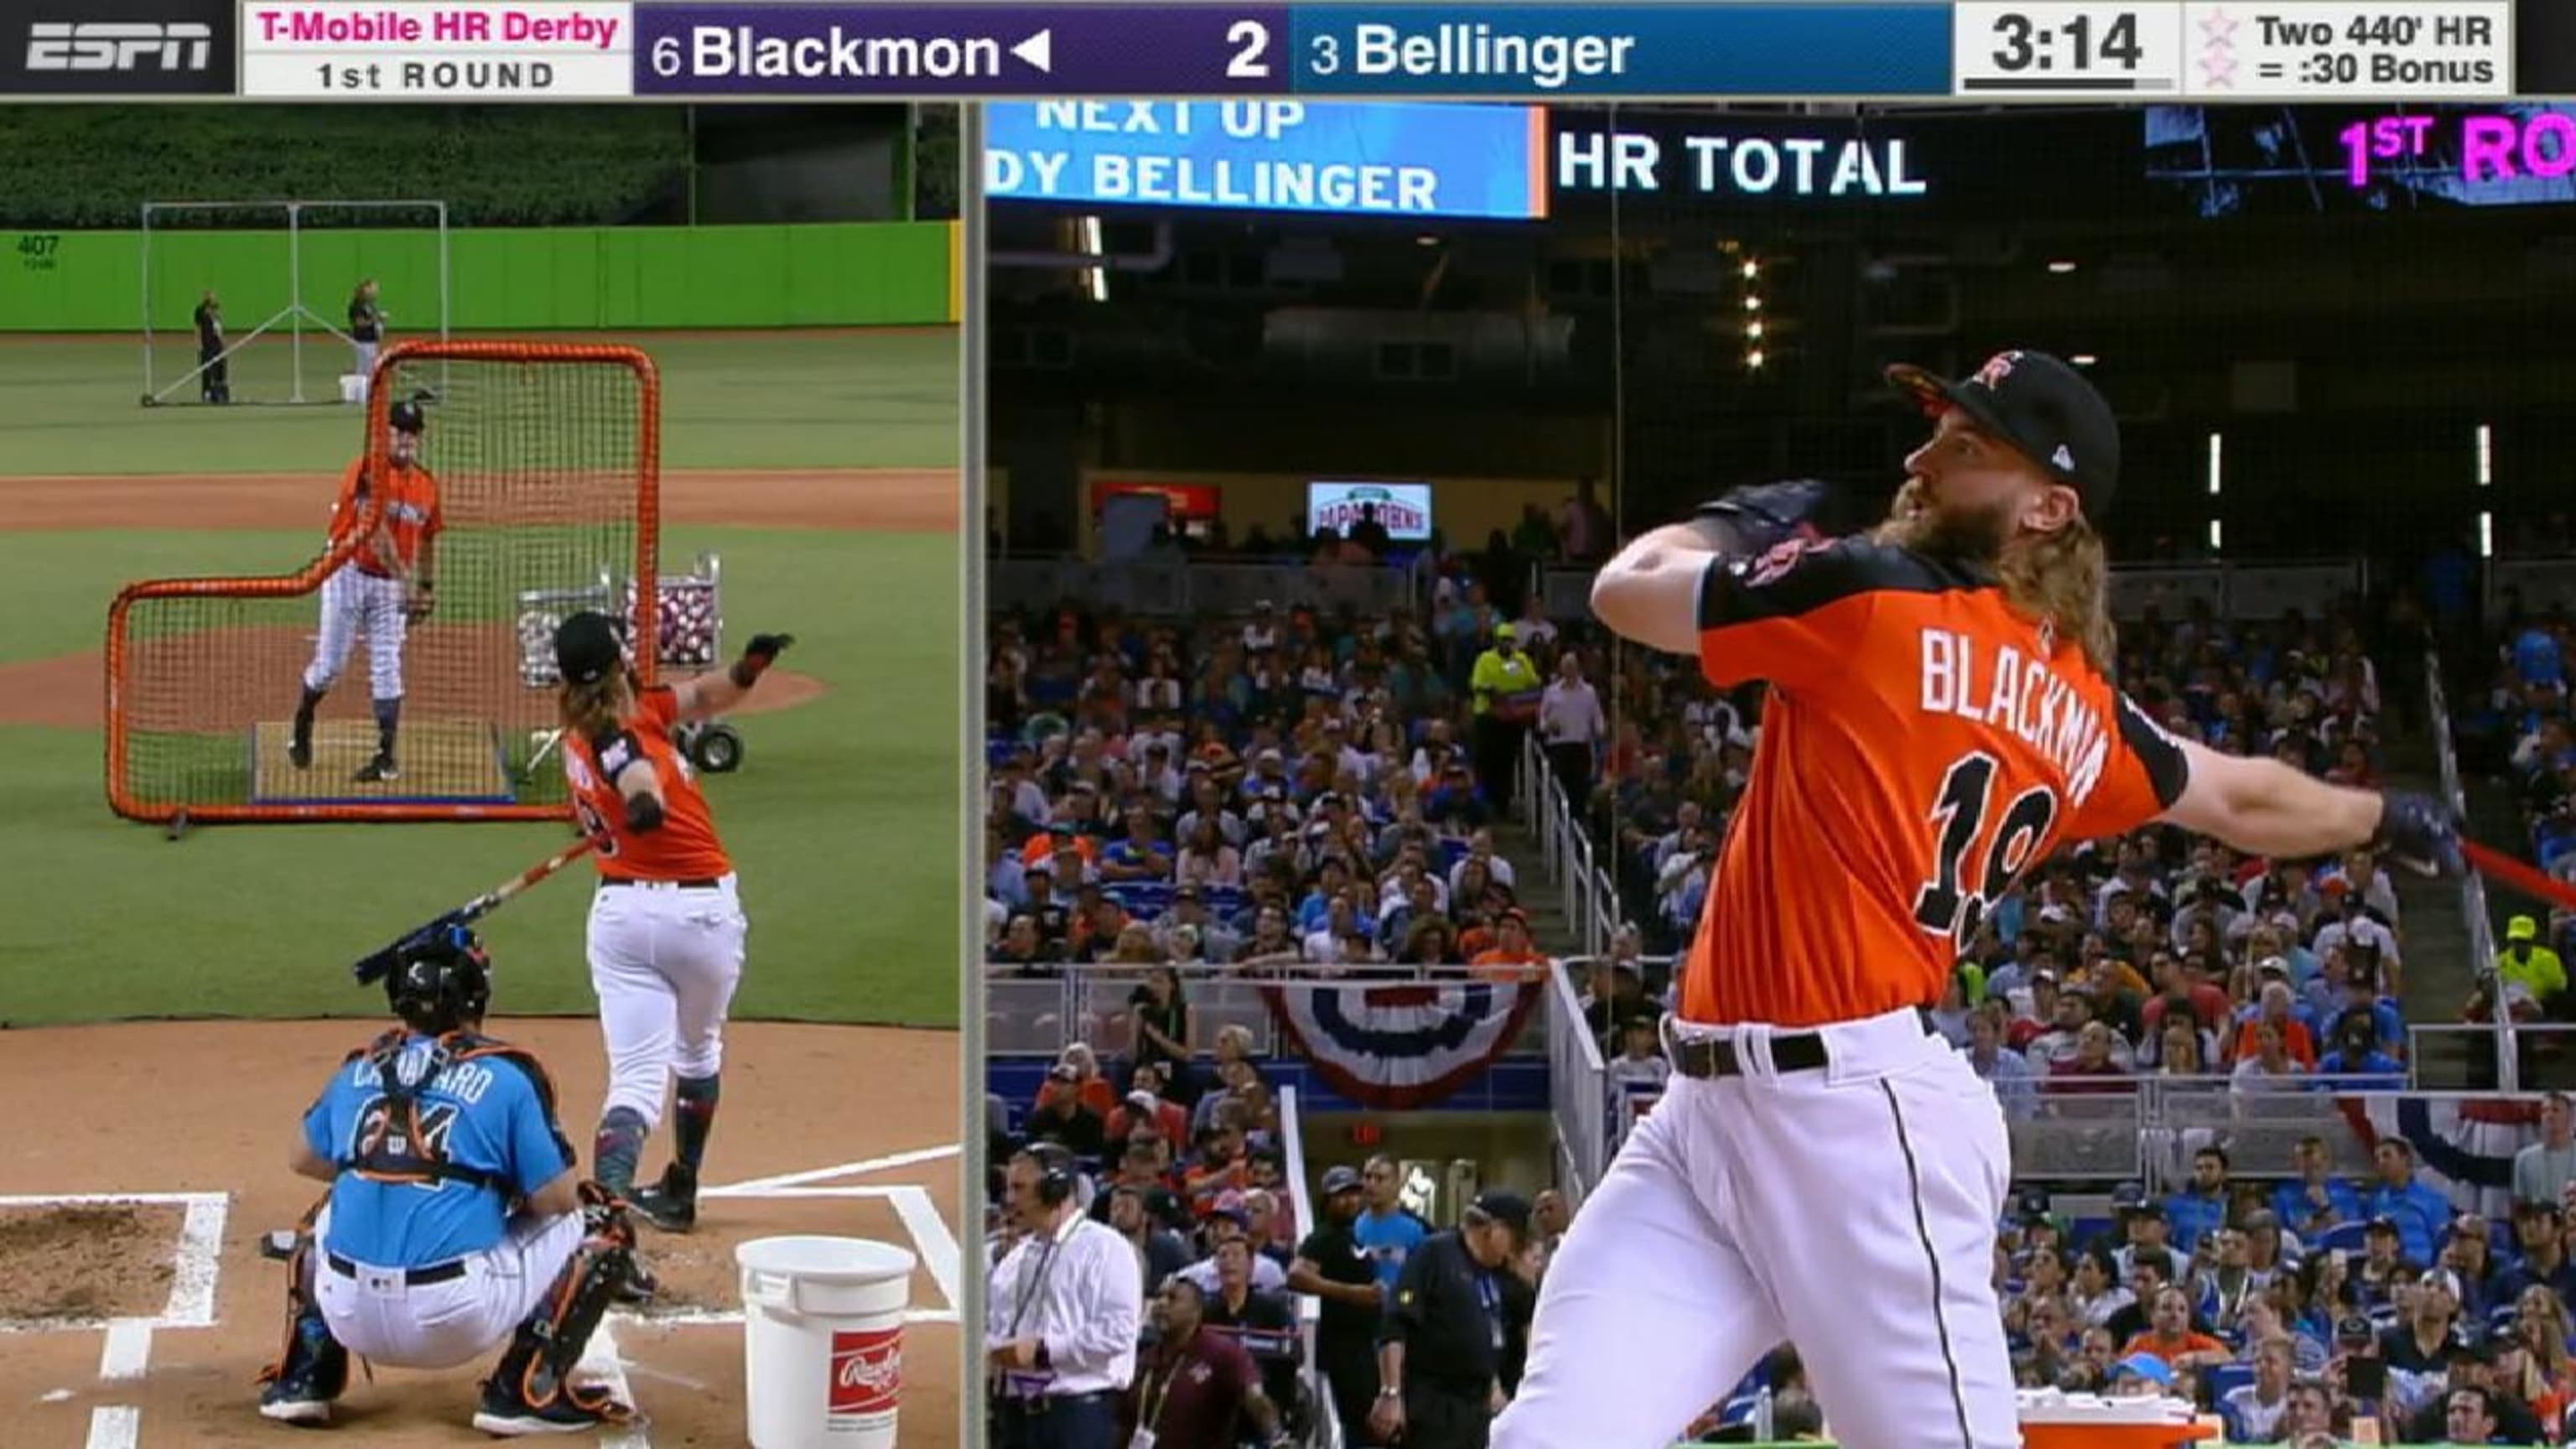 X 上的MLB：「Joey Gallo is your final participant in the #HRDerby